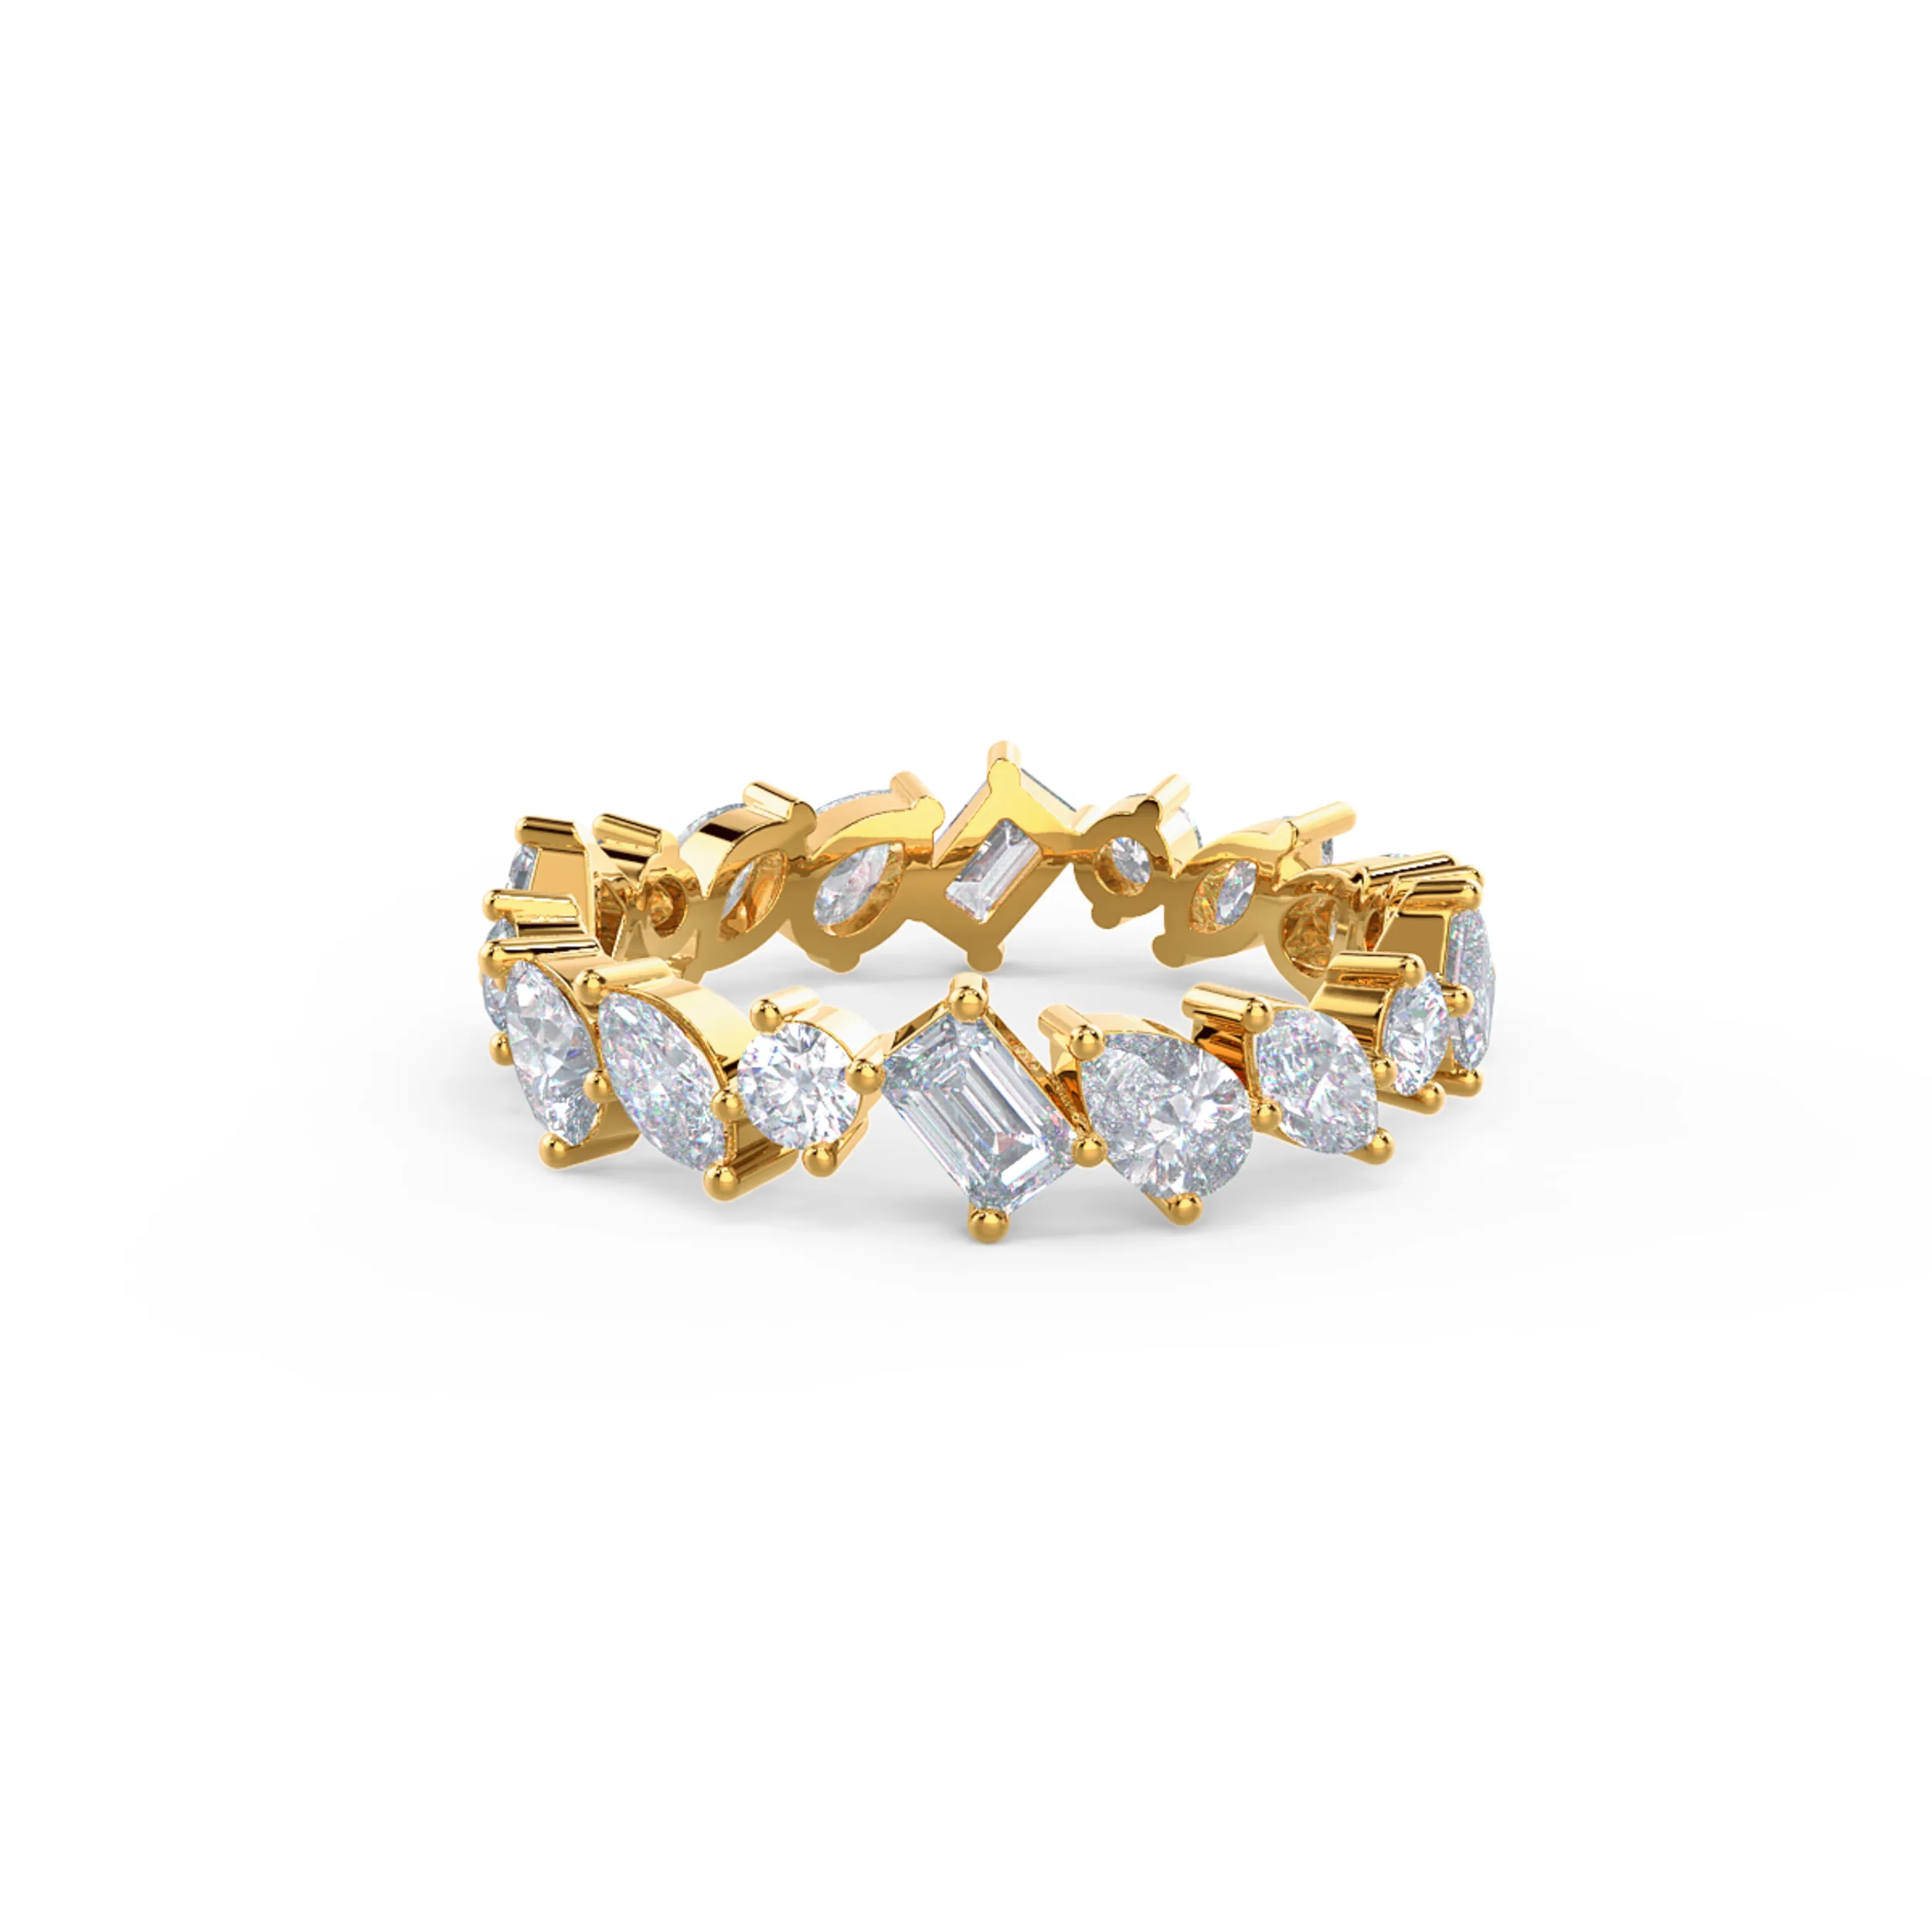 High Quality 2.5 ct Diamonds set in 14k Yellow Gold Fiona Eternity Band (Main View)